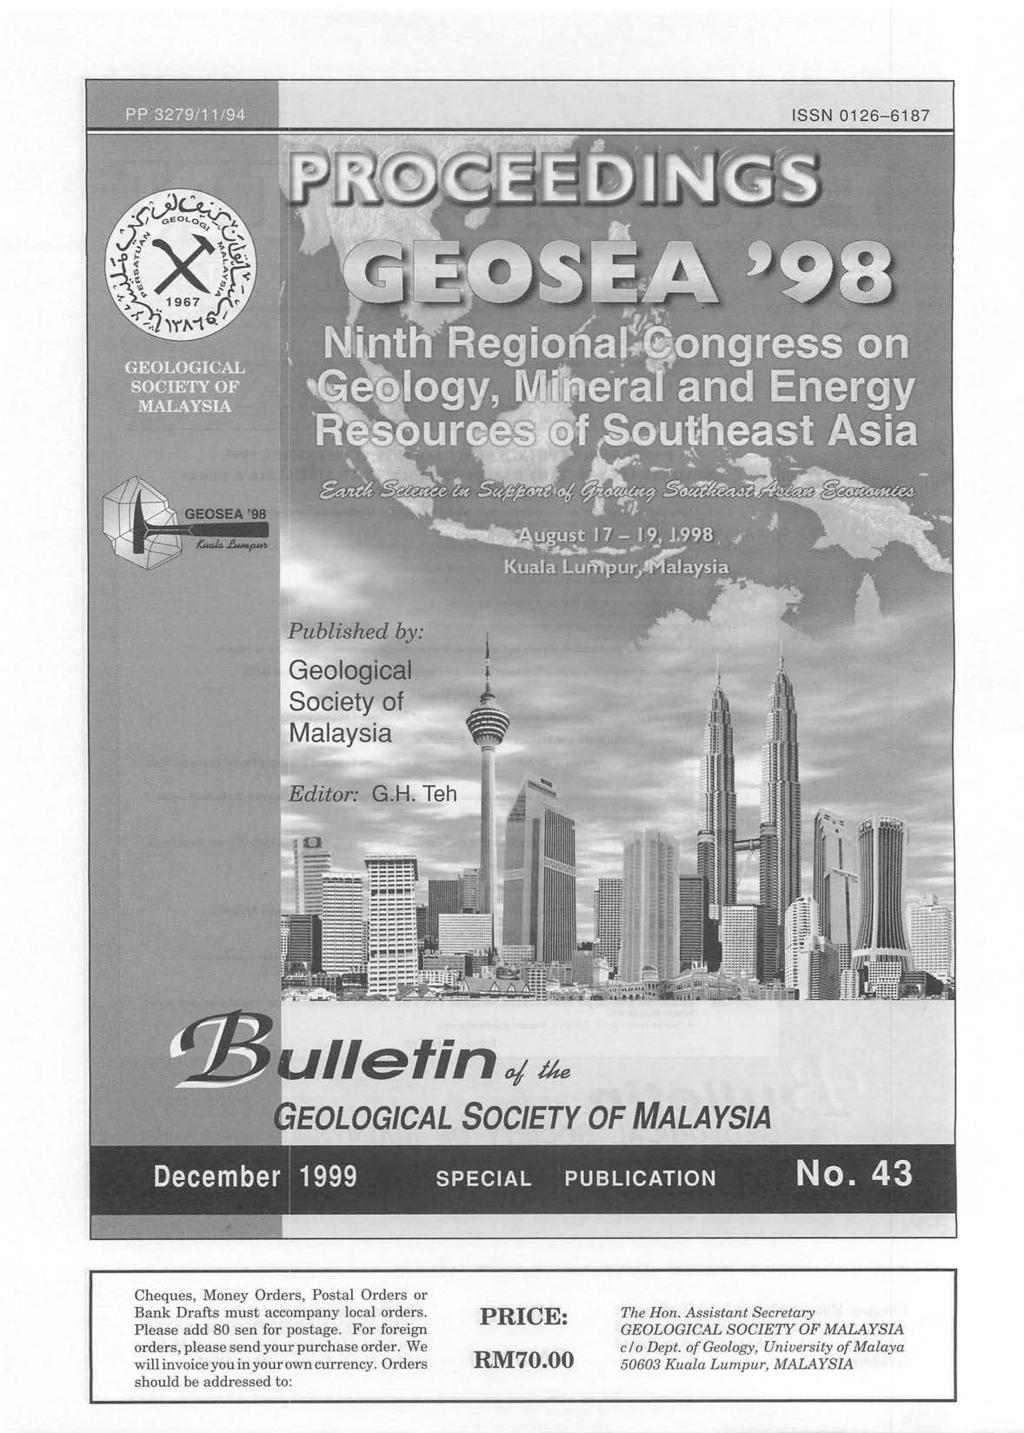 ISSN 0126-6187 GEOSEA'98 Published by: Geological Society of Malaysia G.H. Teh Iletino/~e EOLOGICAL SOCIETY OF MALAYSIA December 1999 SPECIAL PUBLICATION No.